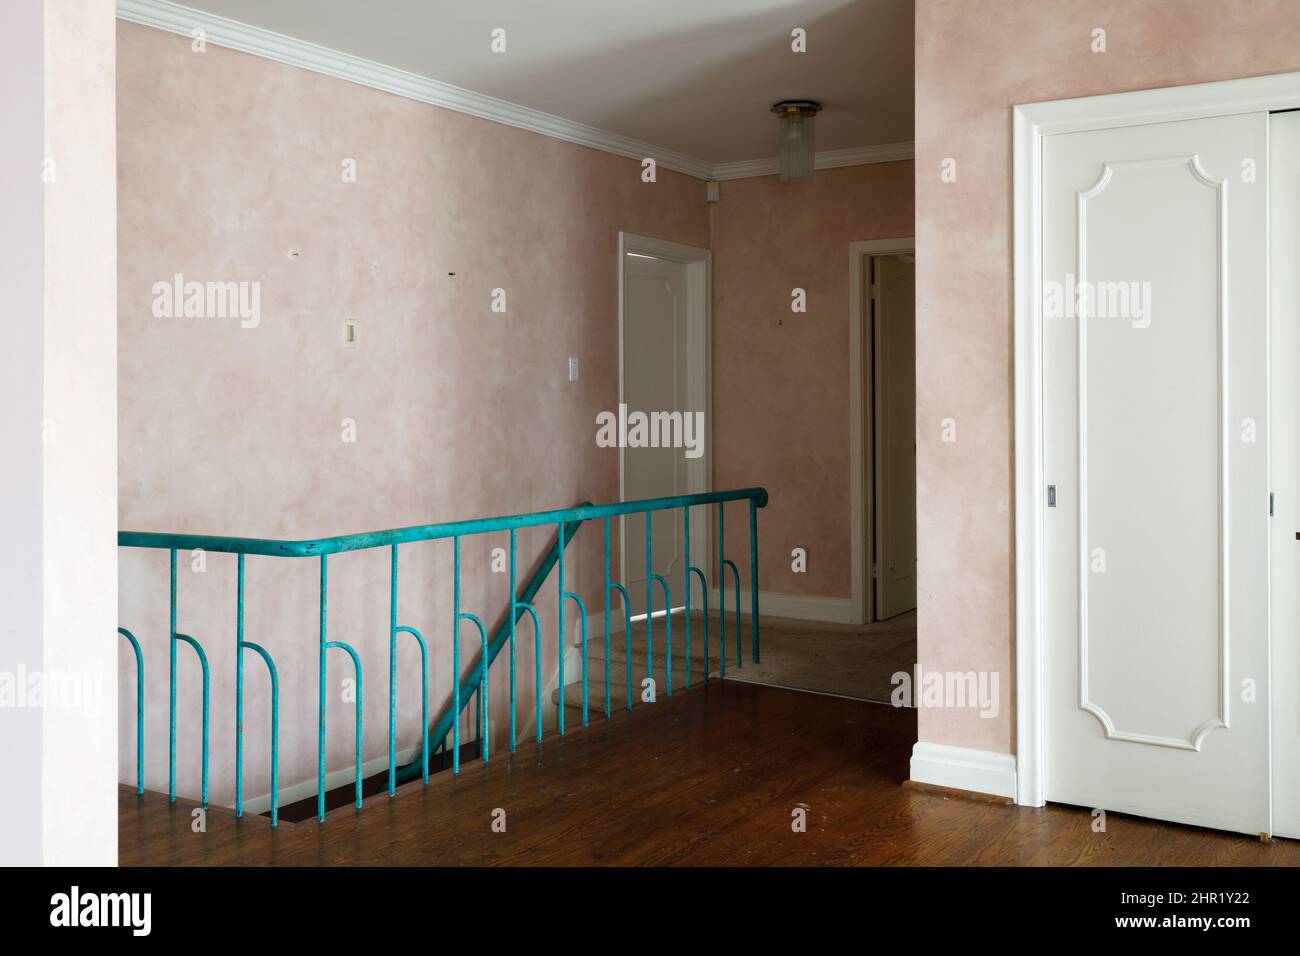 A wooden staircase railing with decorative metal spindles painted turquoise in a mid century build home.  This house has been demolished. Stock Photo